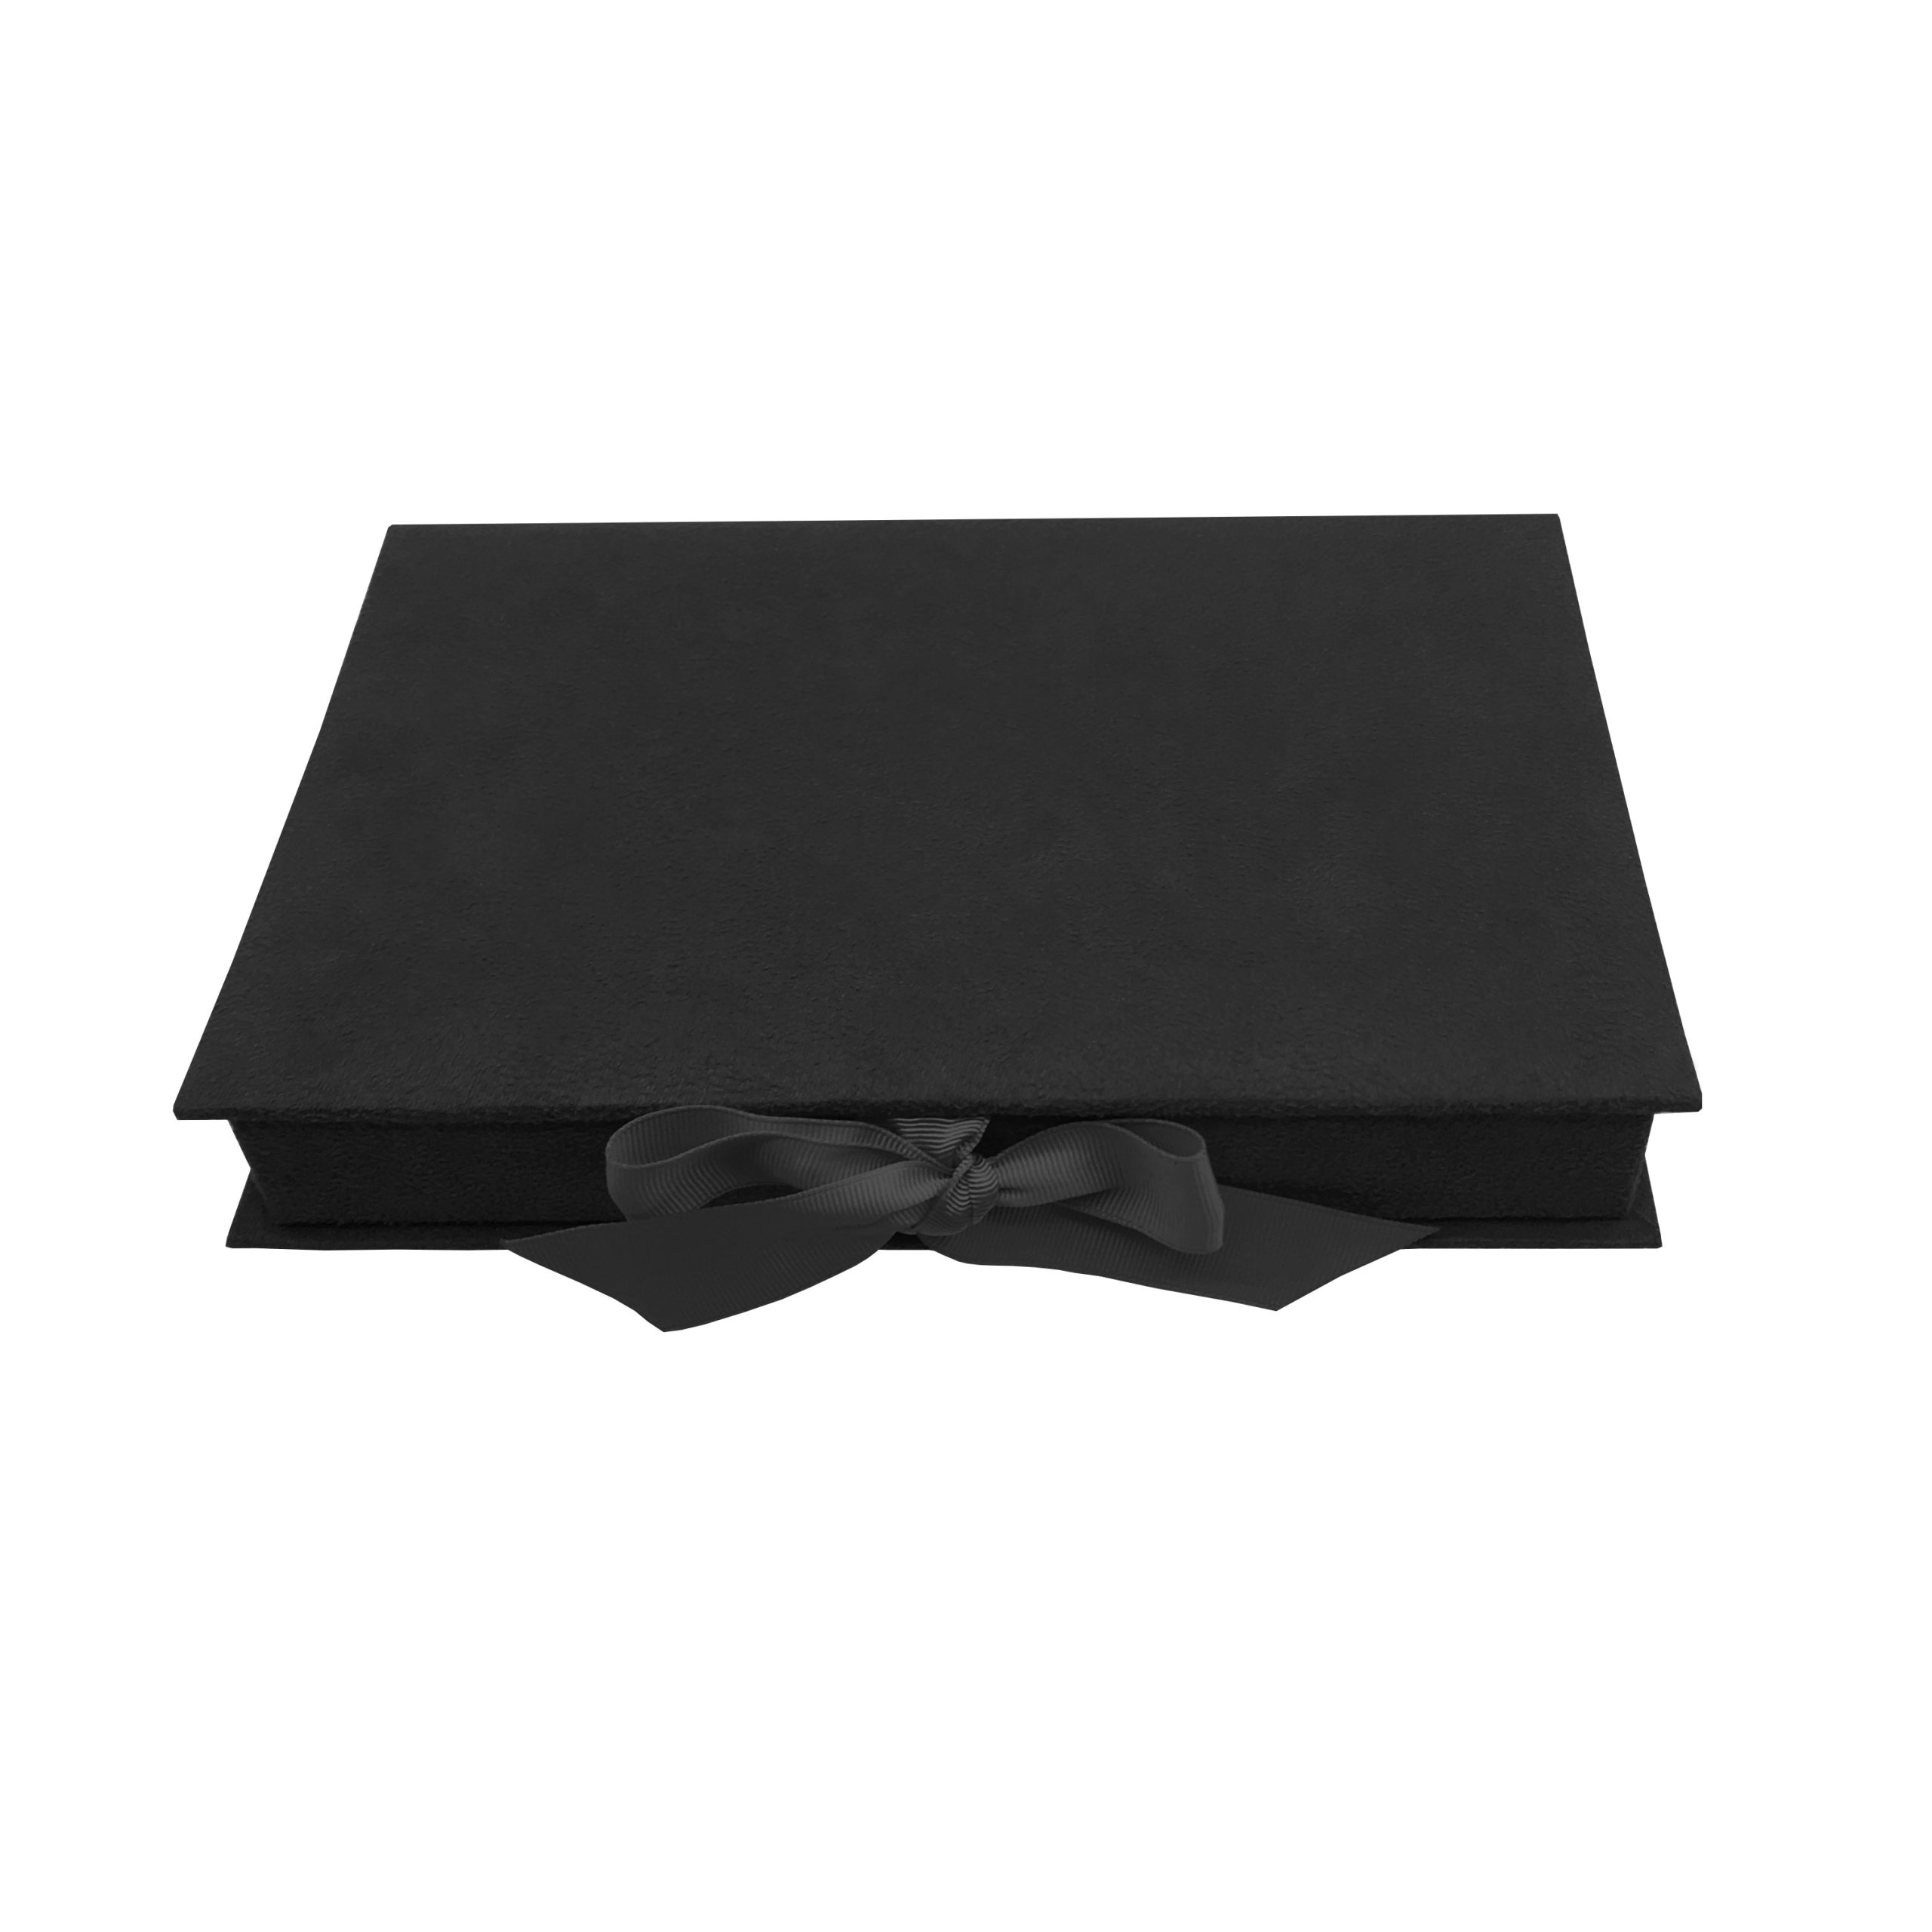 Black hinged lid suede box for wedding and gift